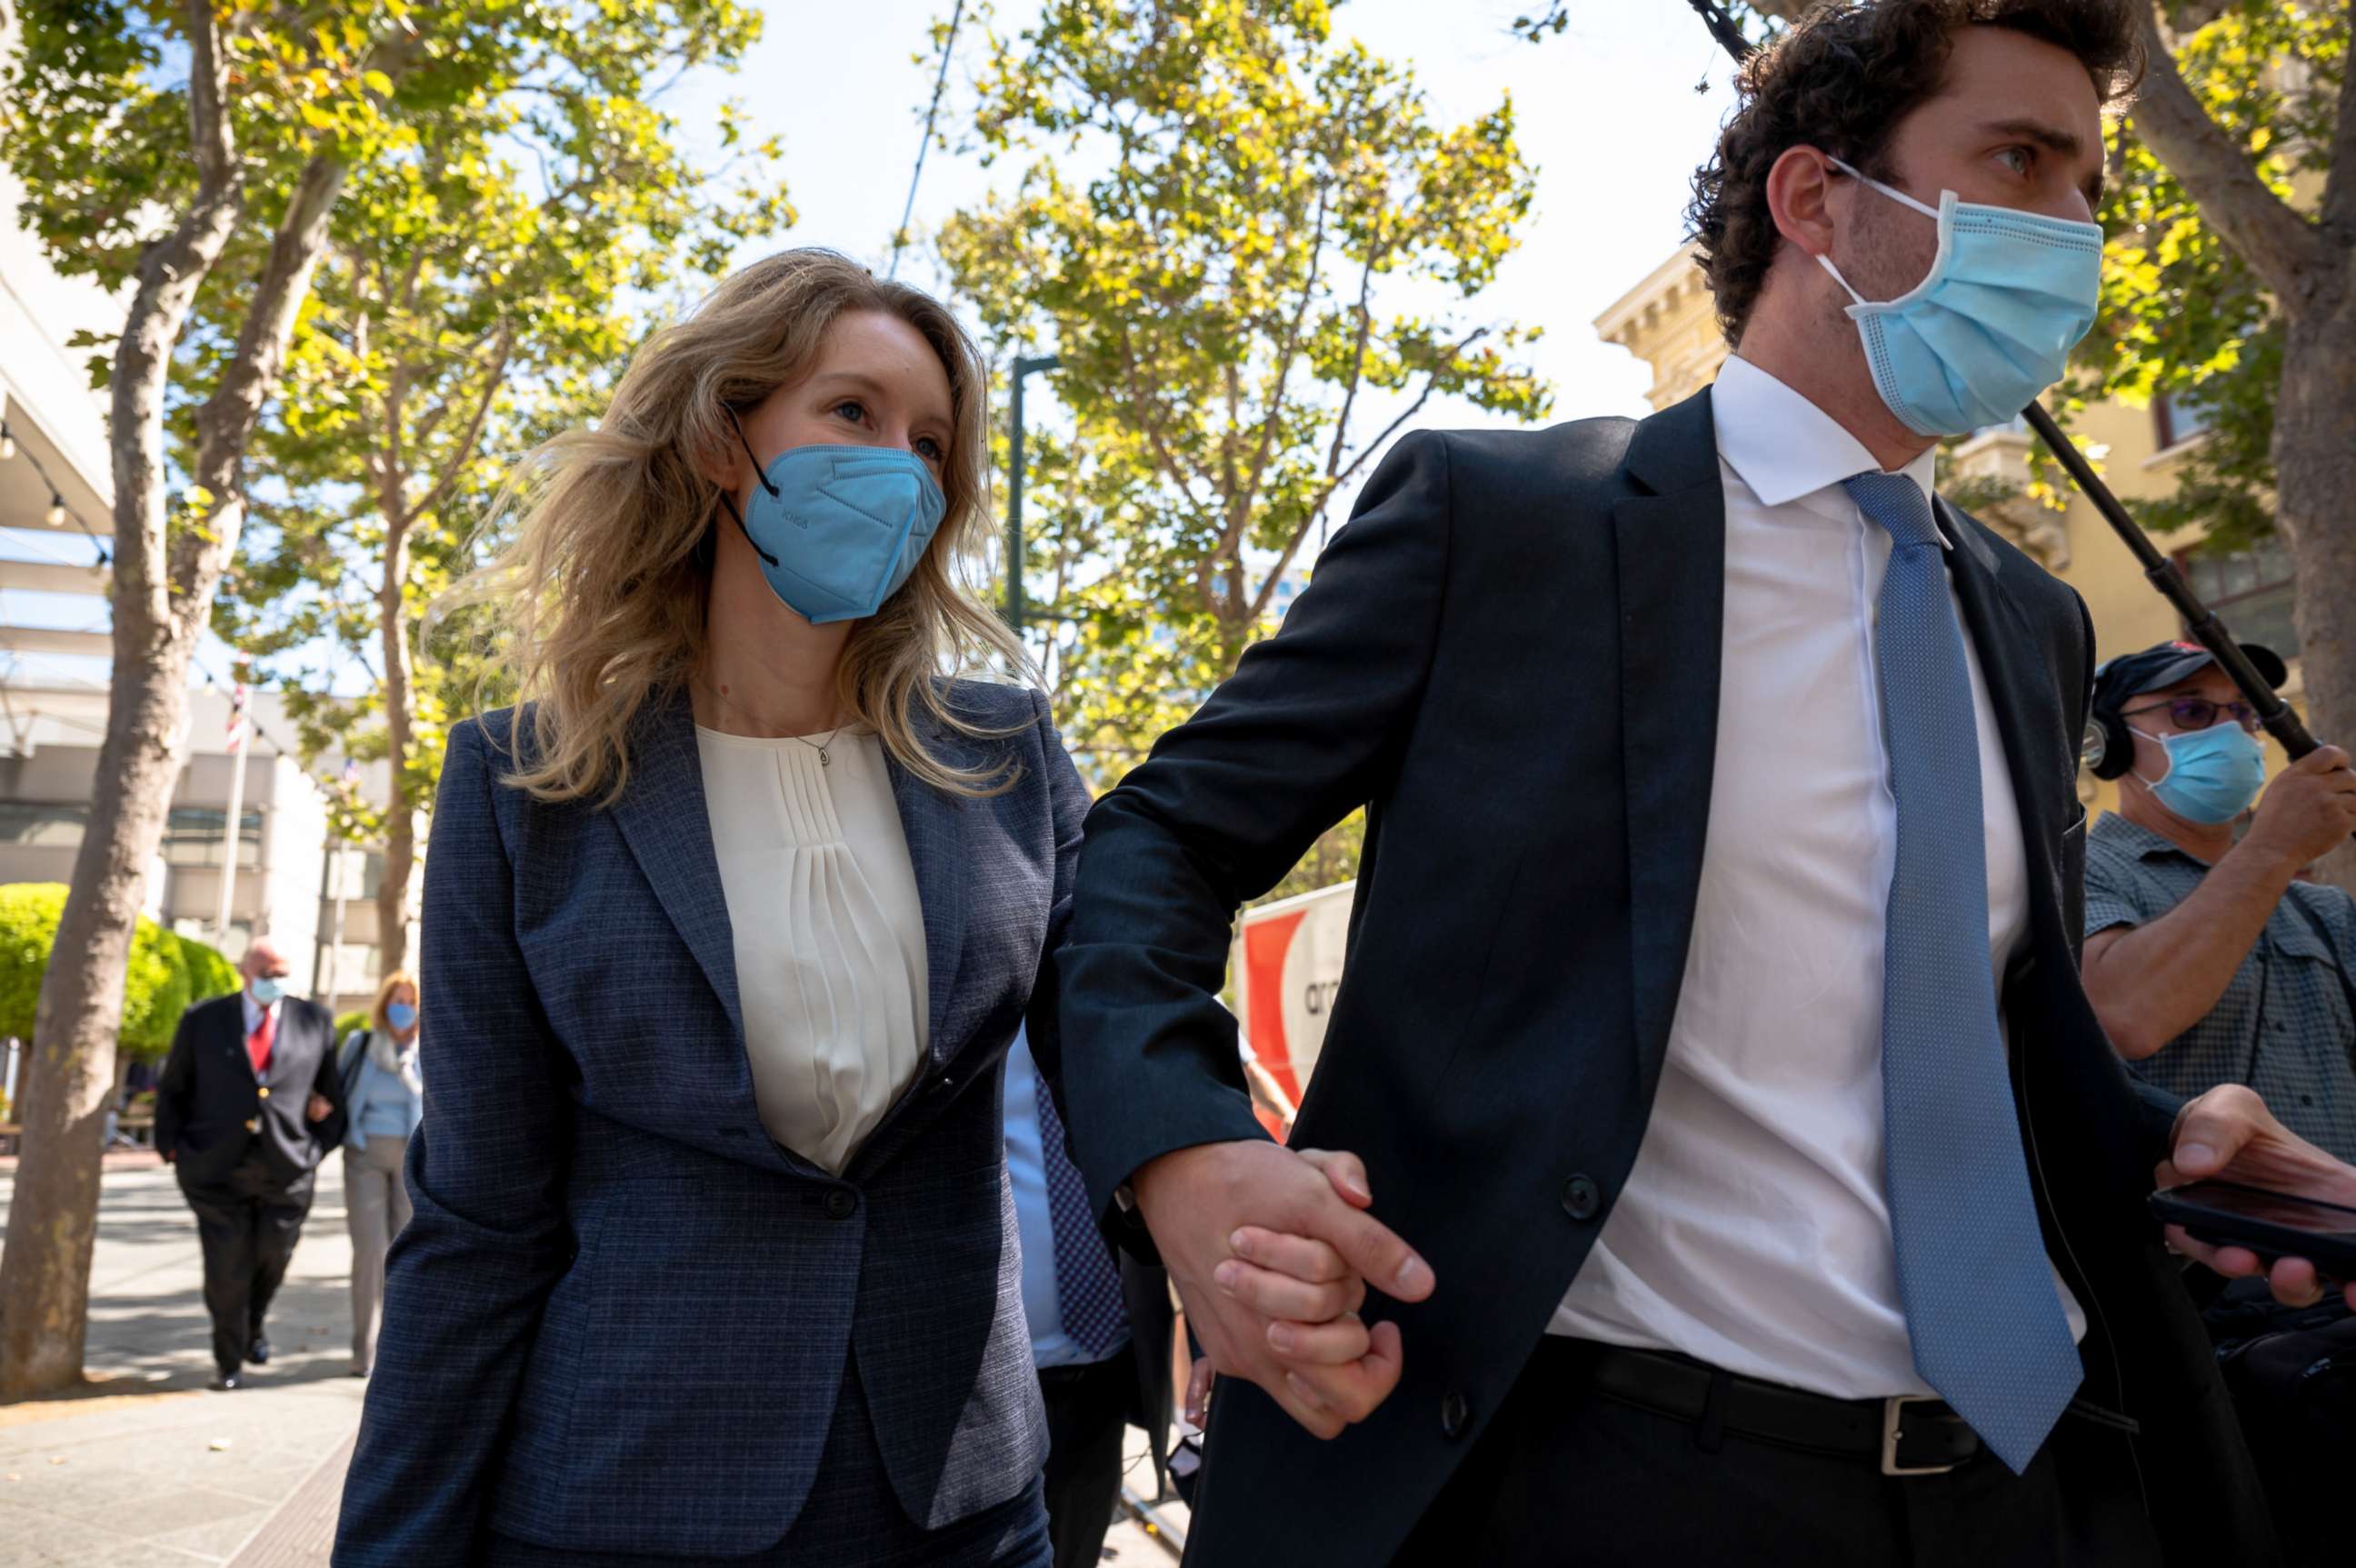 PHOTO: Theranos founder Elizabeth Holmes and her partner, Billy Evans, leave court after the first day of her trial on charges of fraud in San Jose, Calif., Sept. 8, 2021.